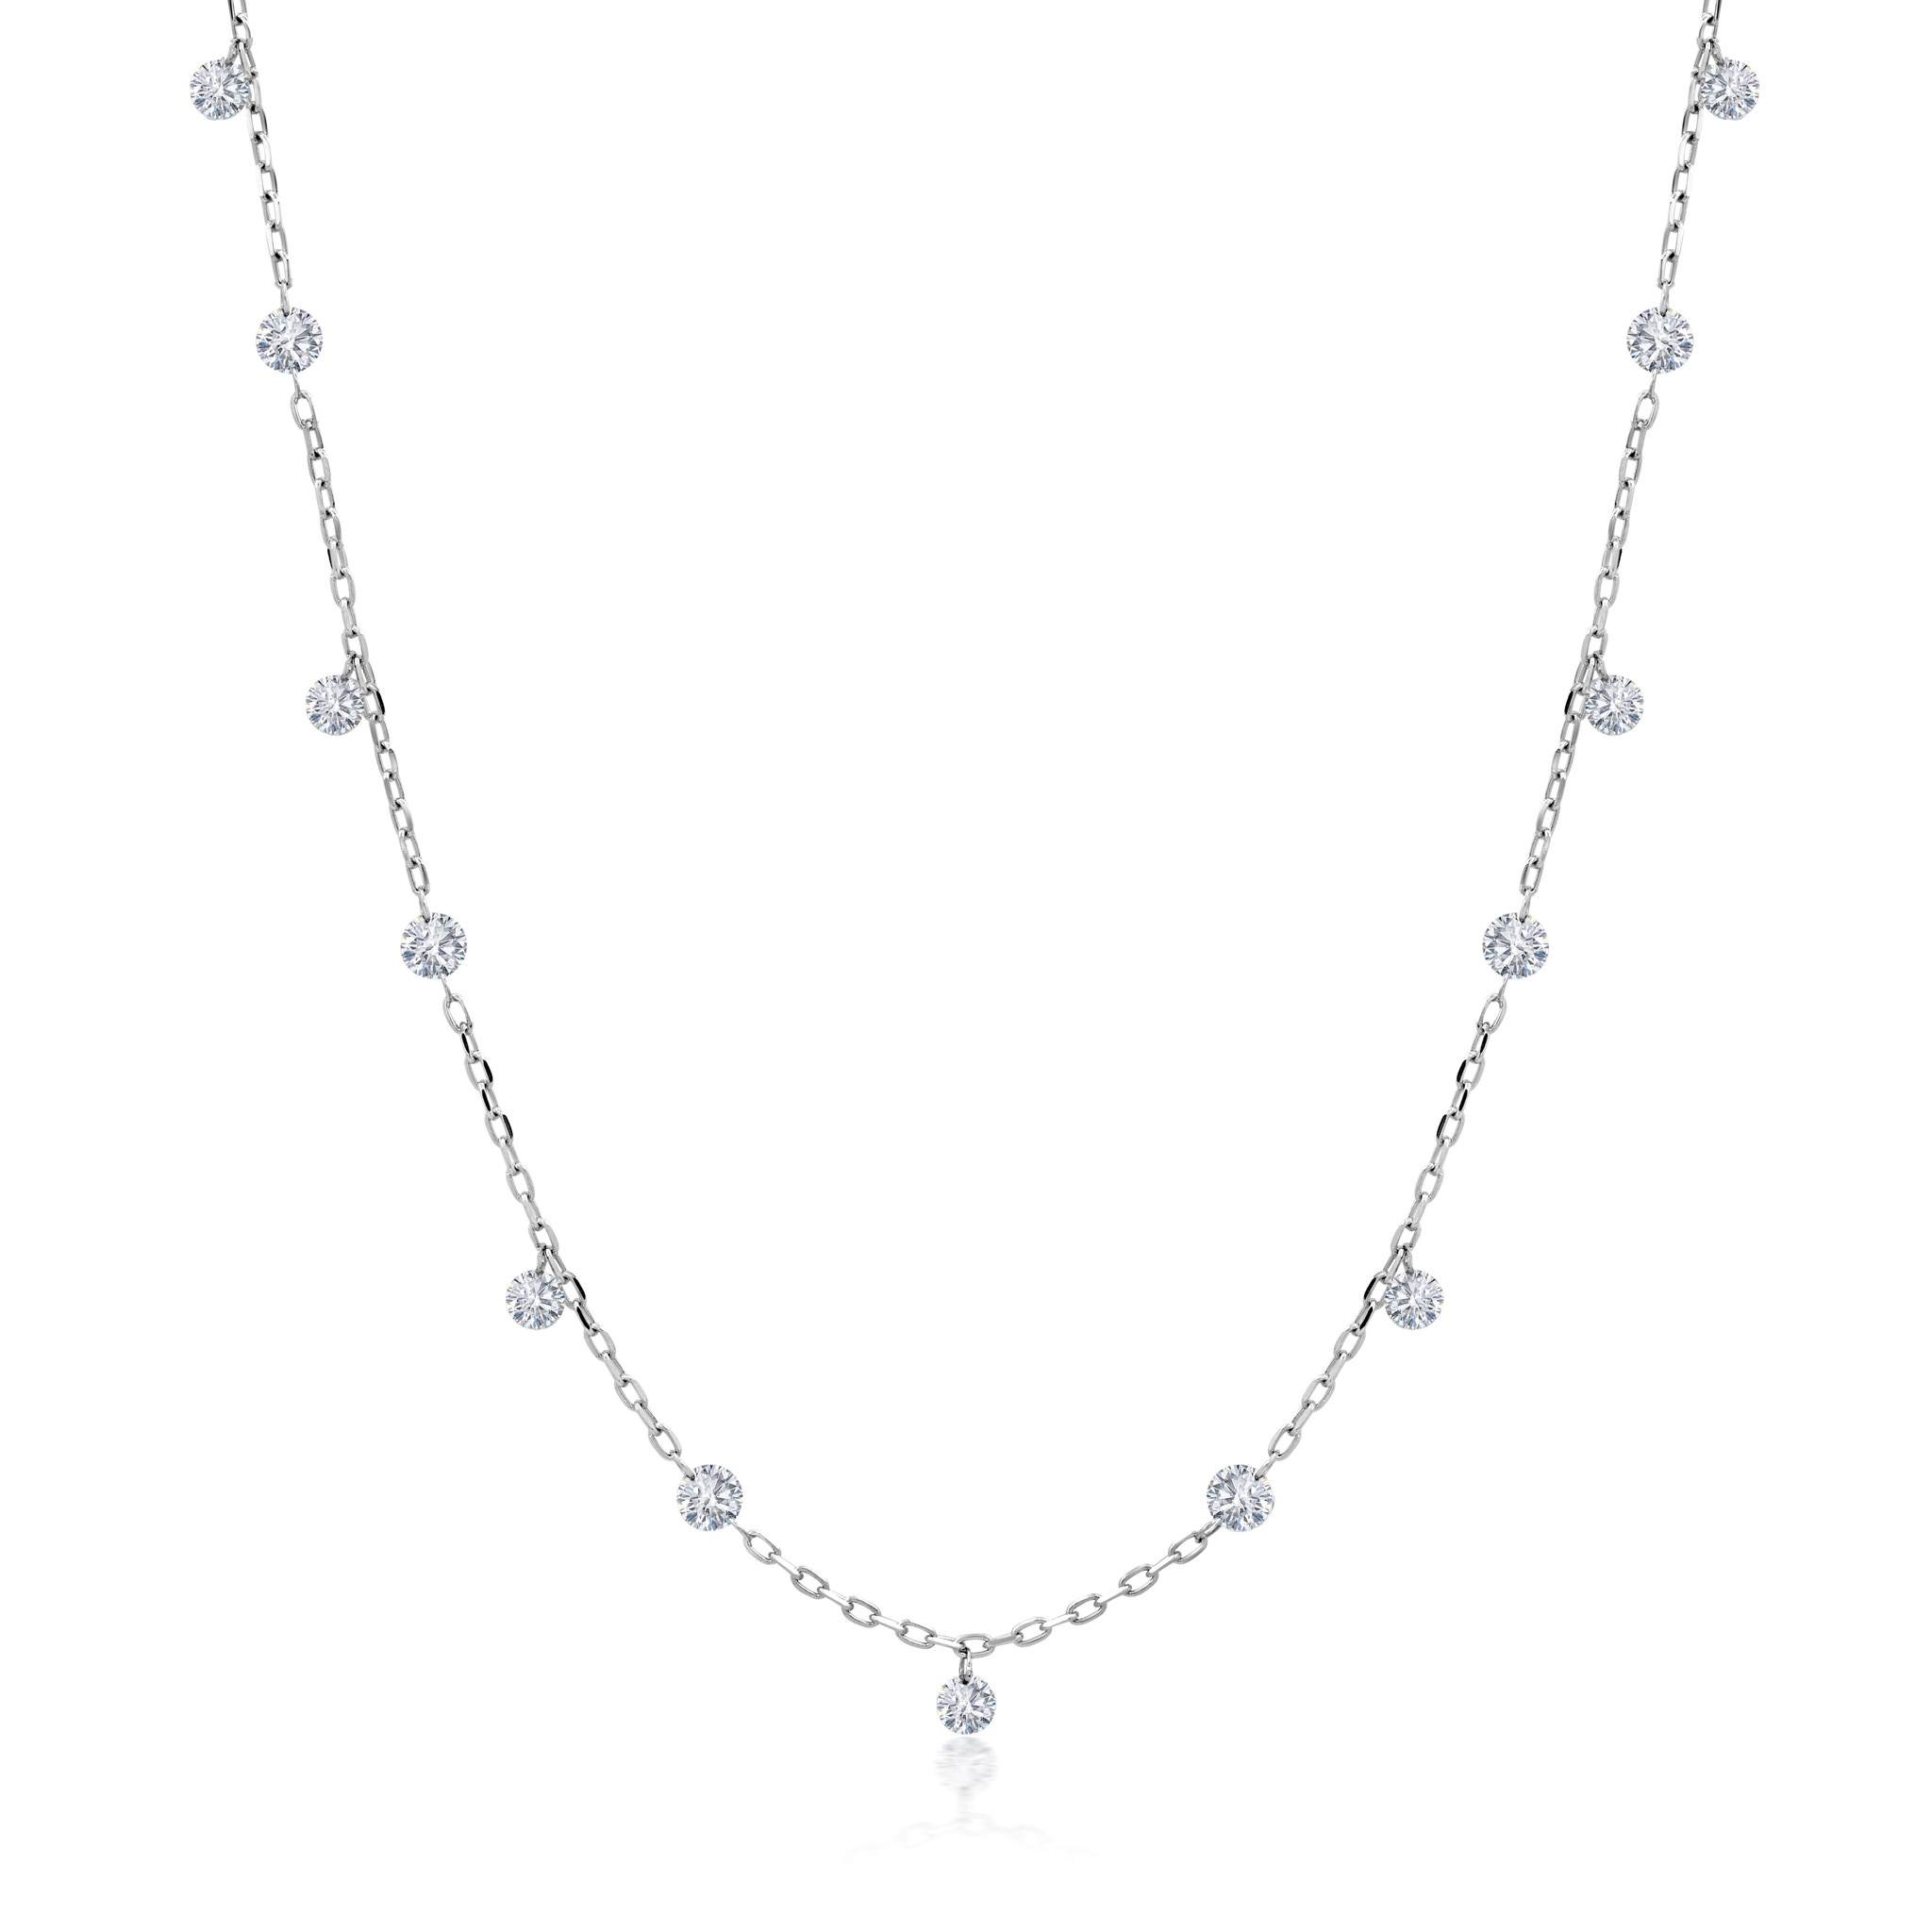 Graziela Gems - Necklace - 1 Ct Floating Diamond Drop &amp; Station Necklace - White Gold